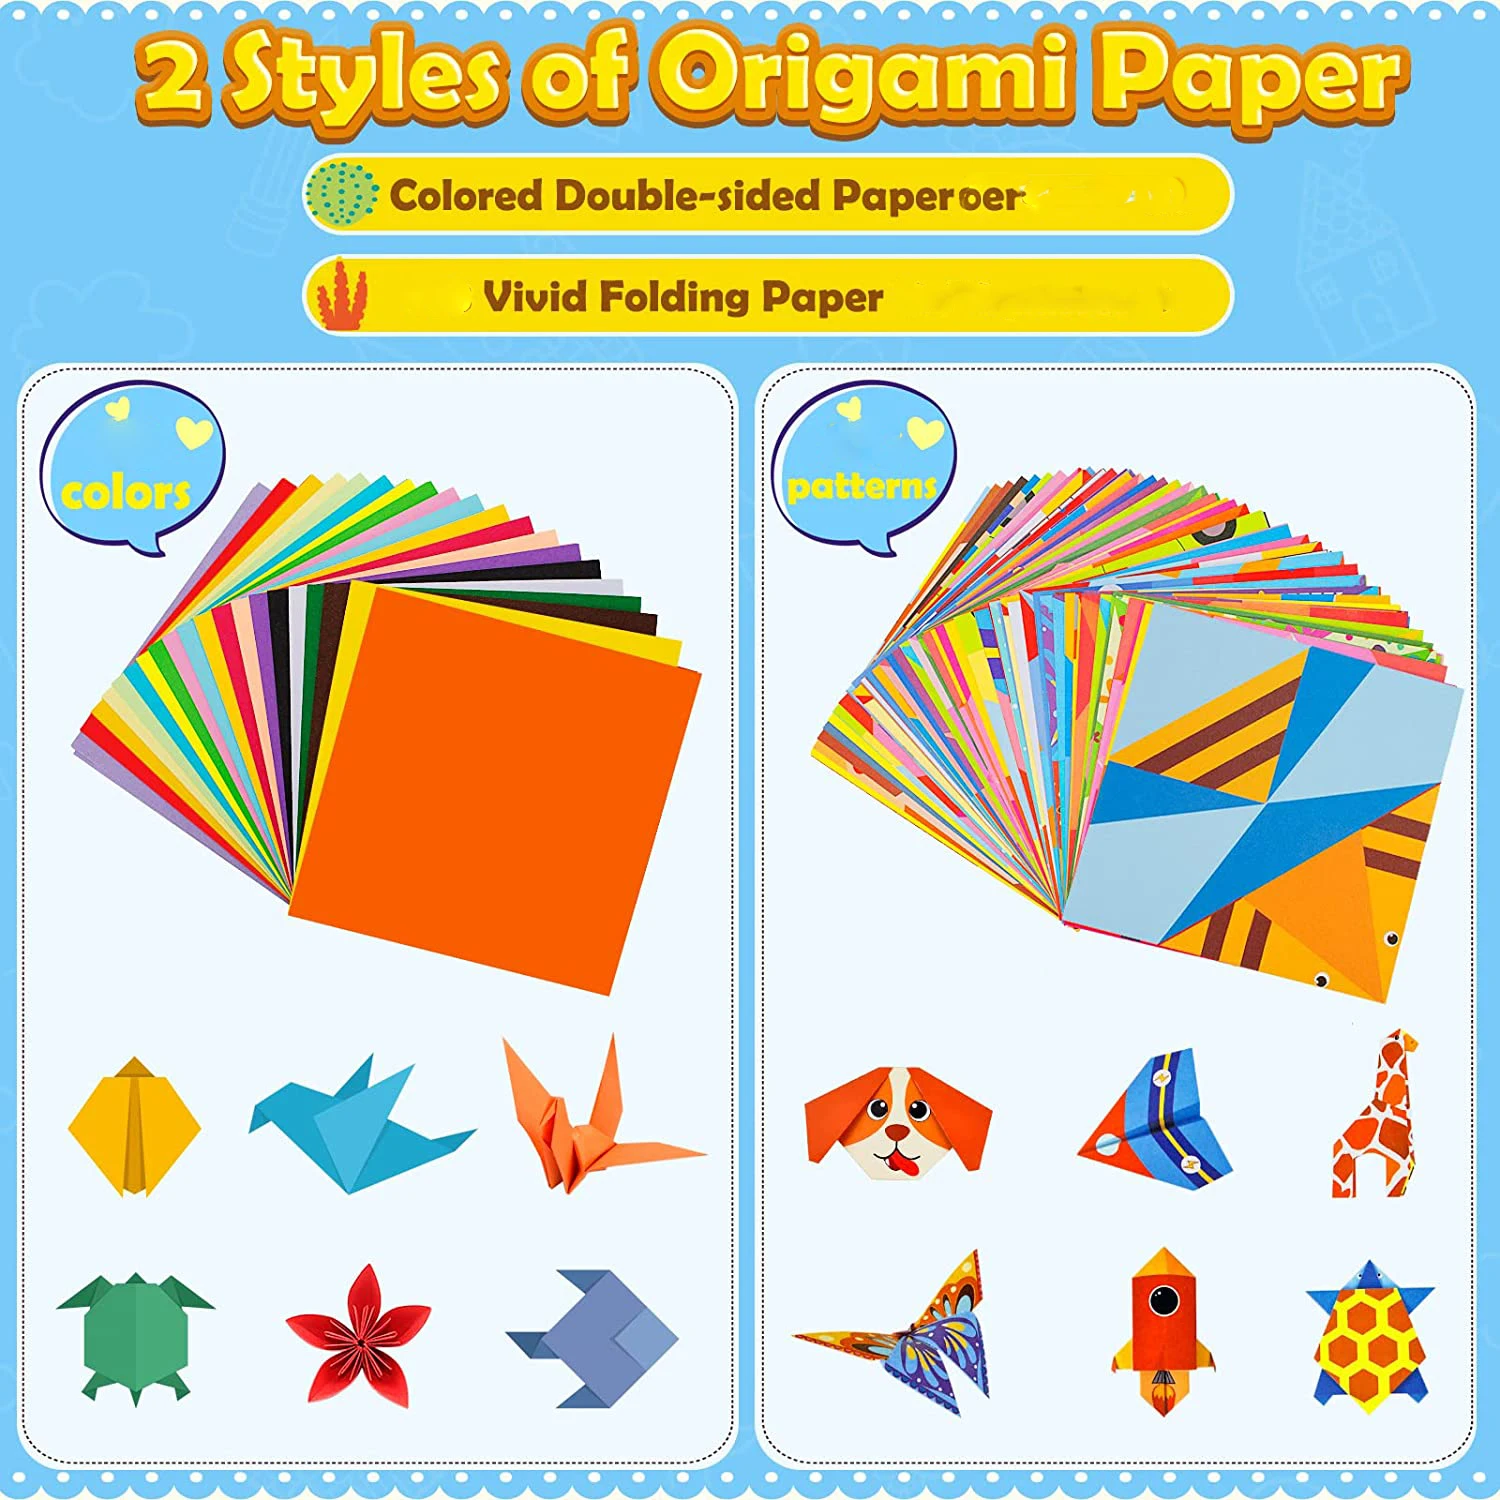 https://ae01.alicdn.com/kf/Saf85d00fb3874216a9c781e03494326a3/Craft-Origami-Paper-for-Kids-54Sheets-Vivid-Colorful-Folding-Papers-27Patterns-Art-Projects-Kit-Teen-Birthday.jpg